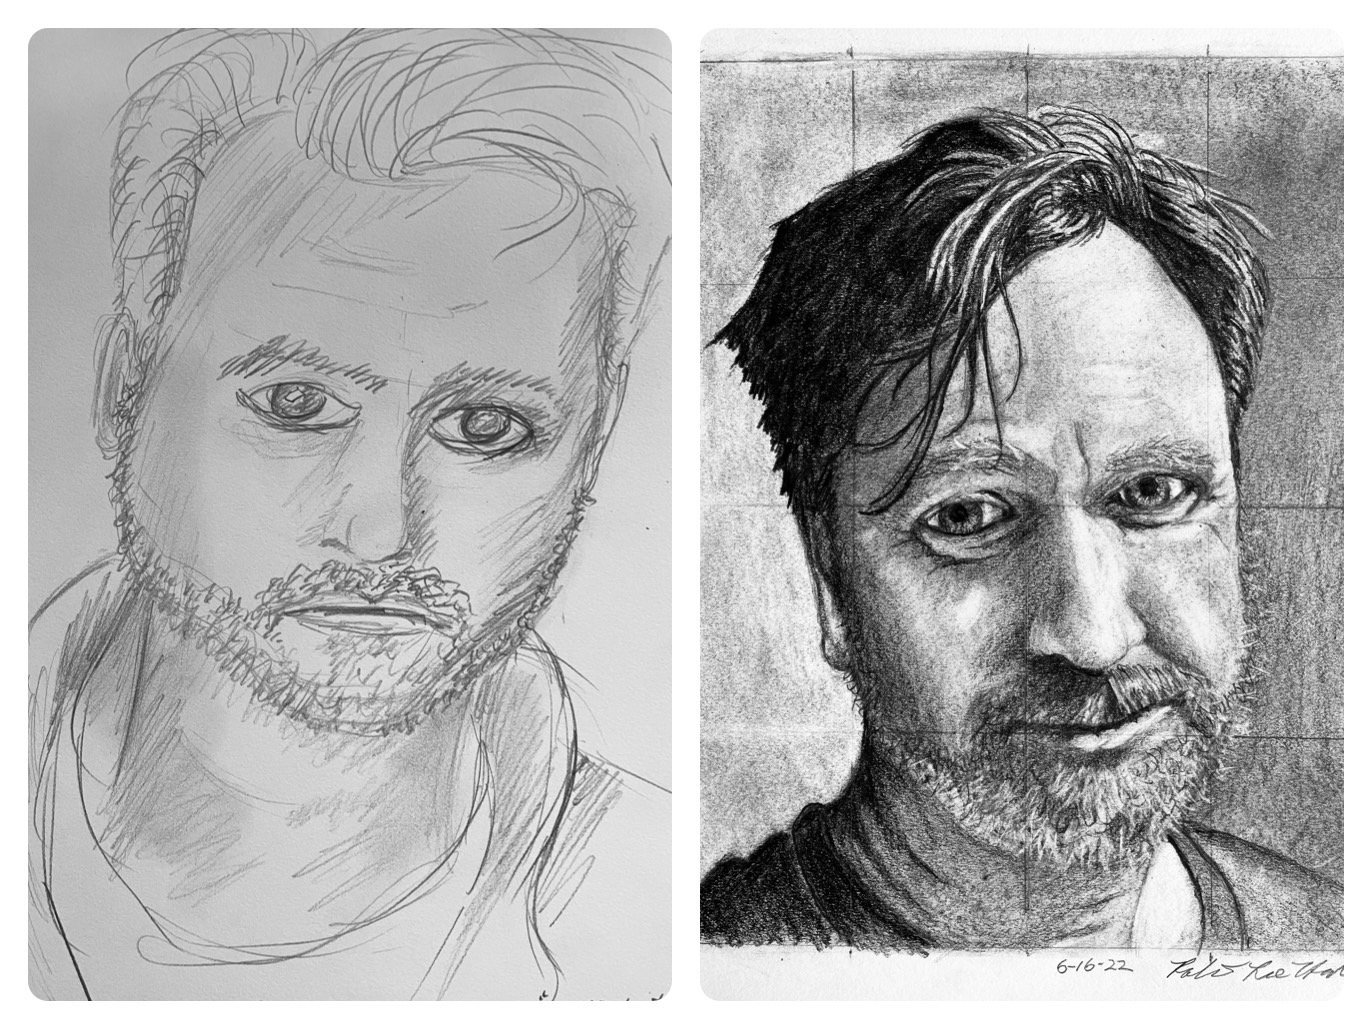 Robert's Before and After Self-Portraits June 13-17, 2022